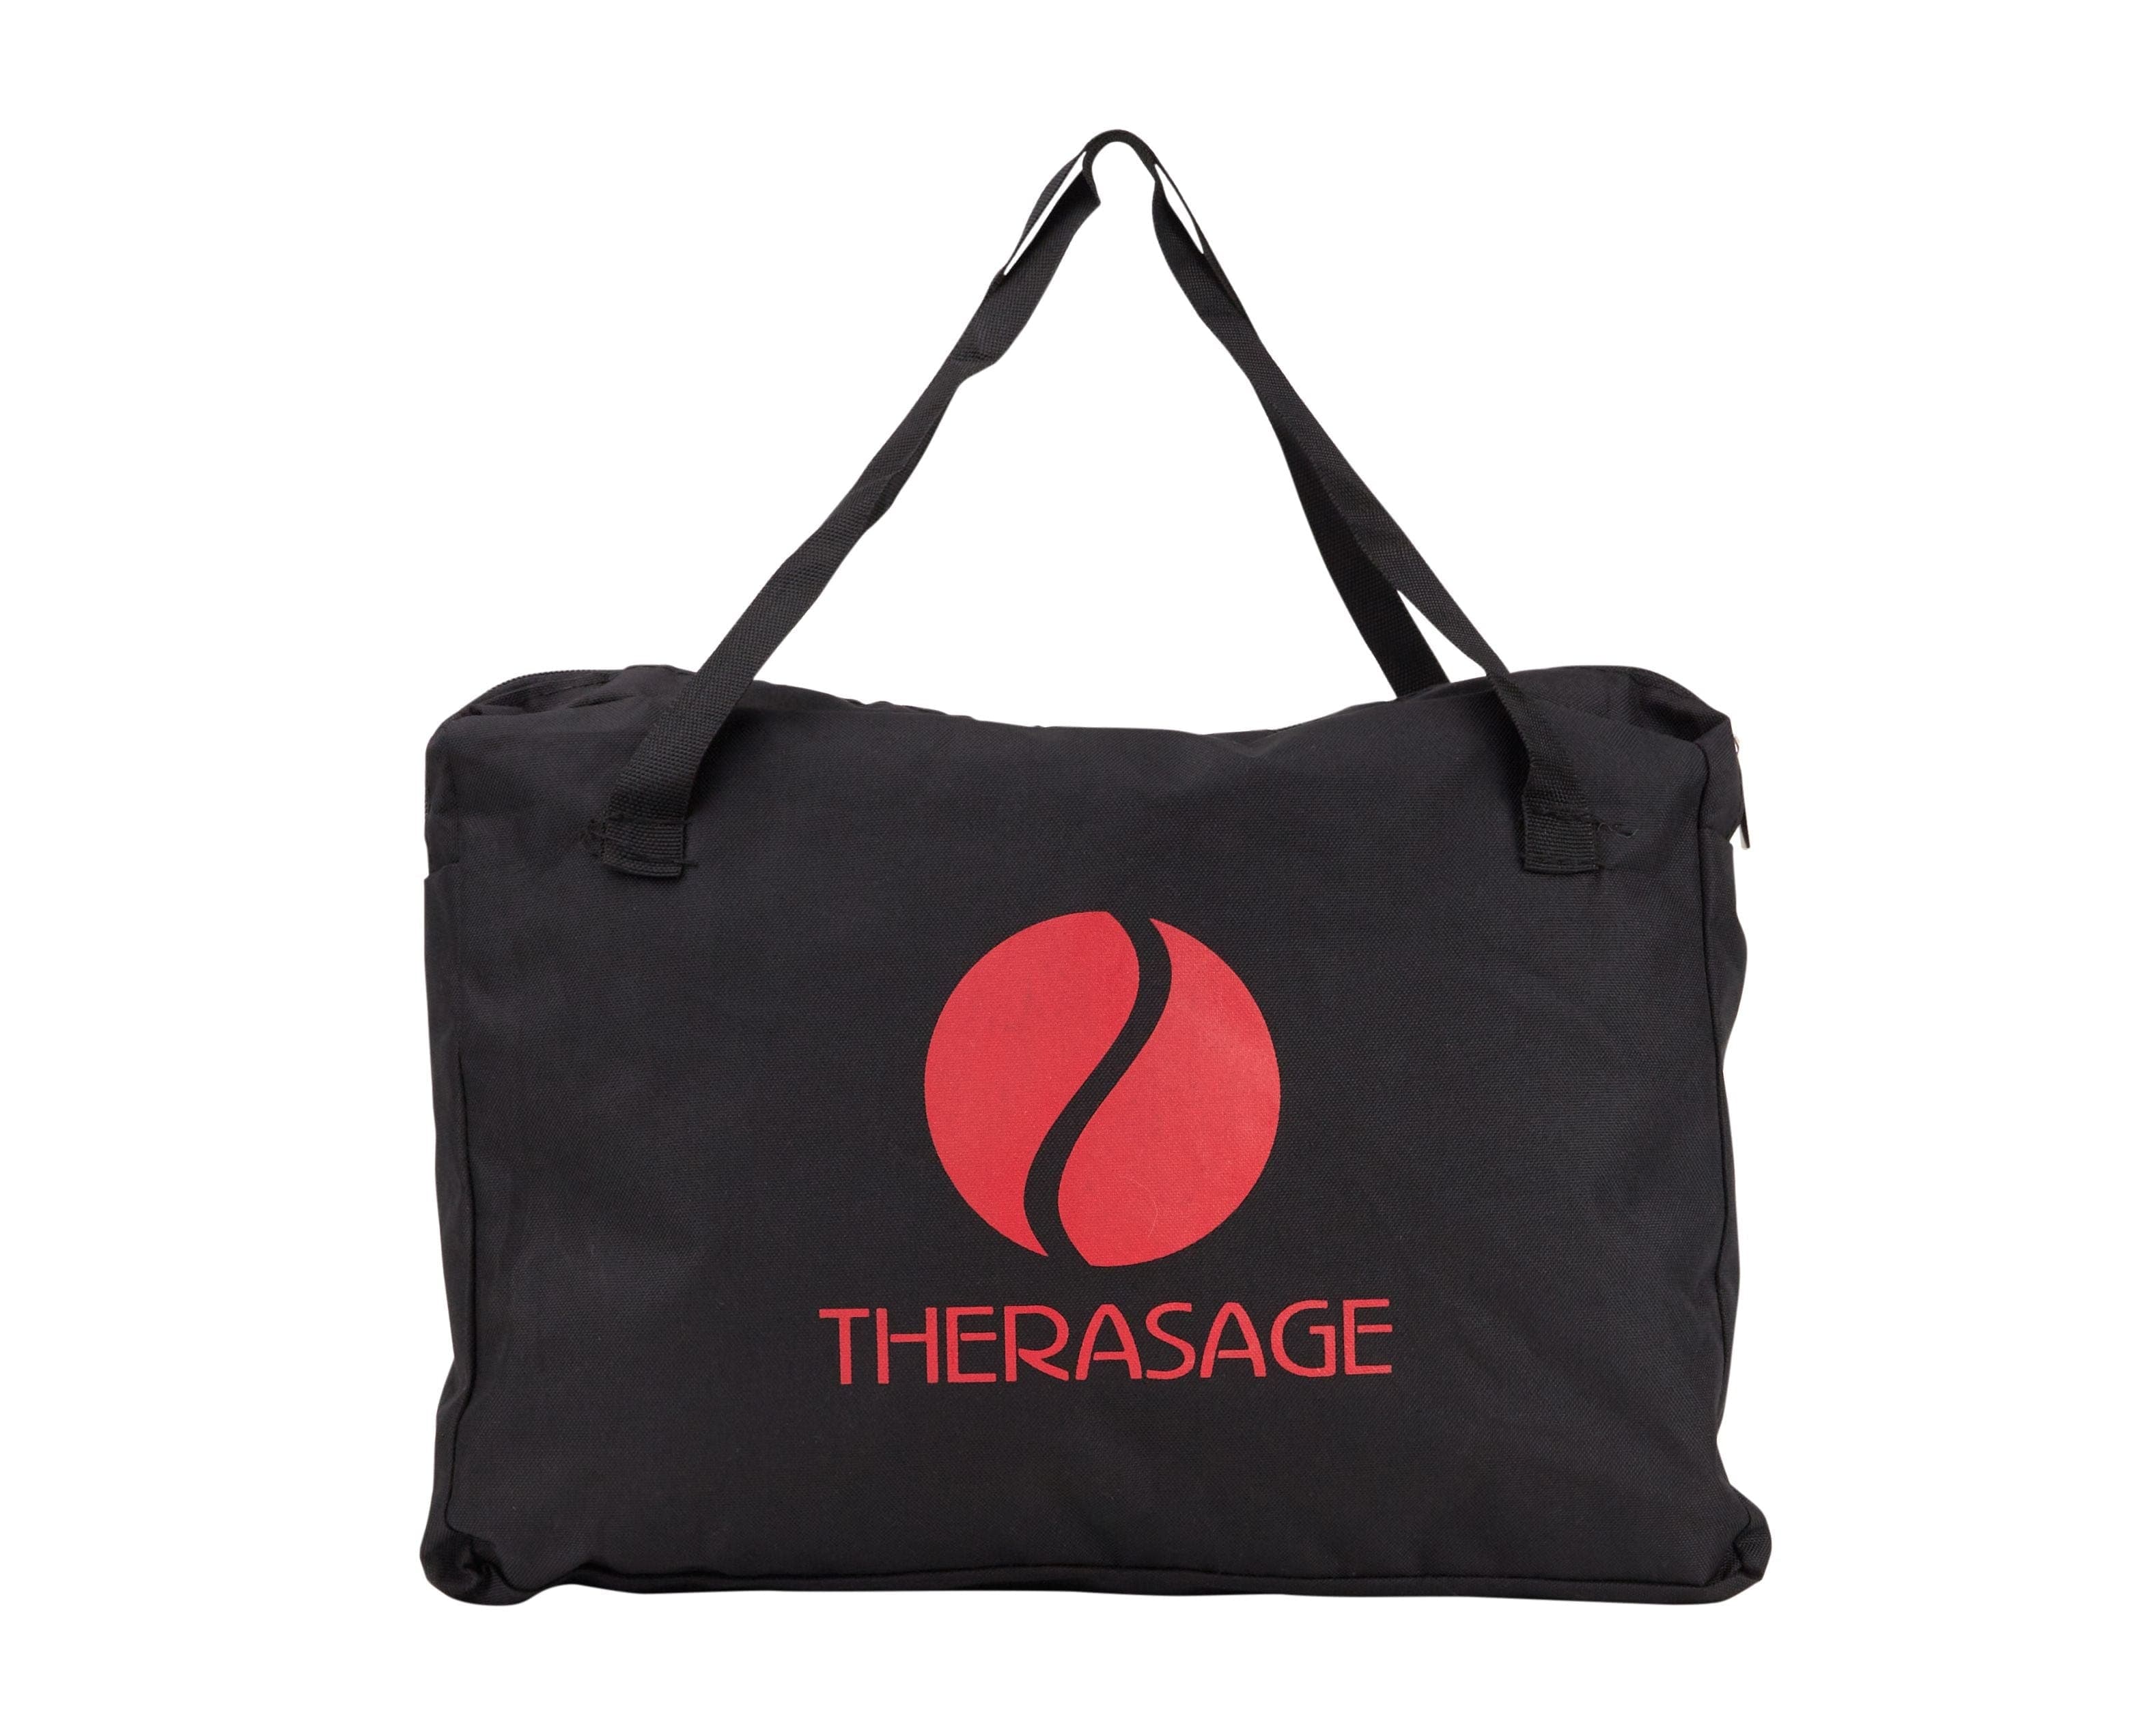 Therasage All Therasage Healing Pad Small - Worldwide Voltage (110-240v)